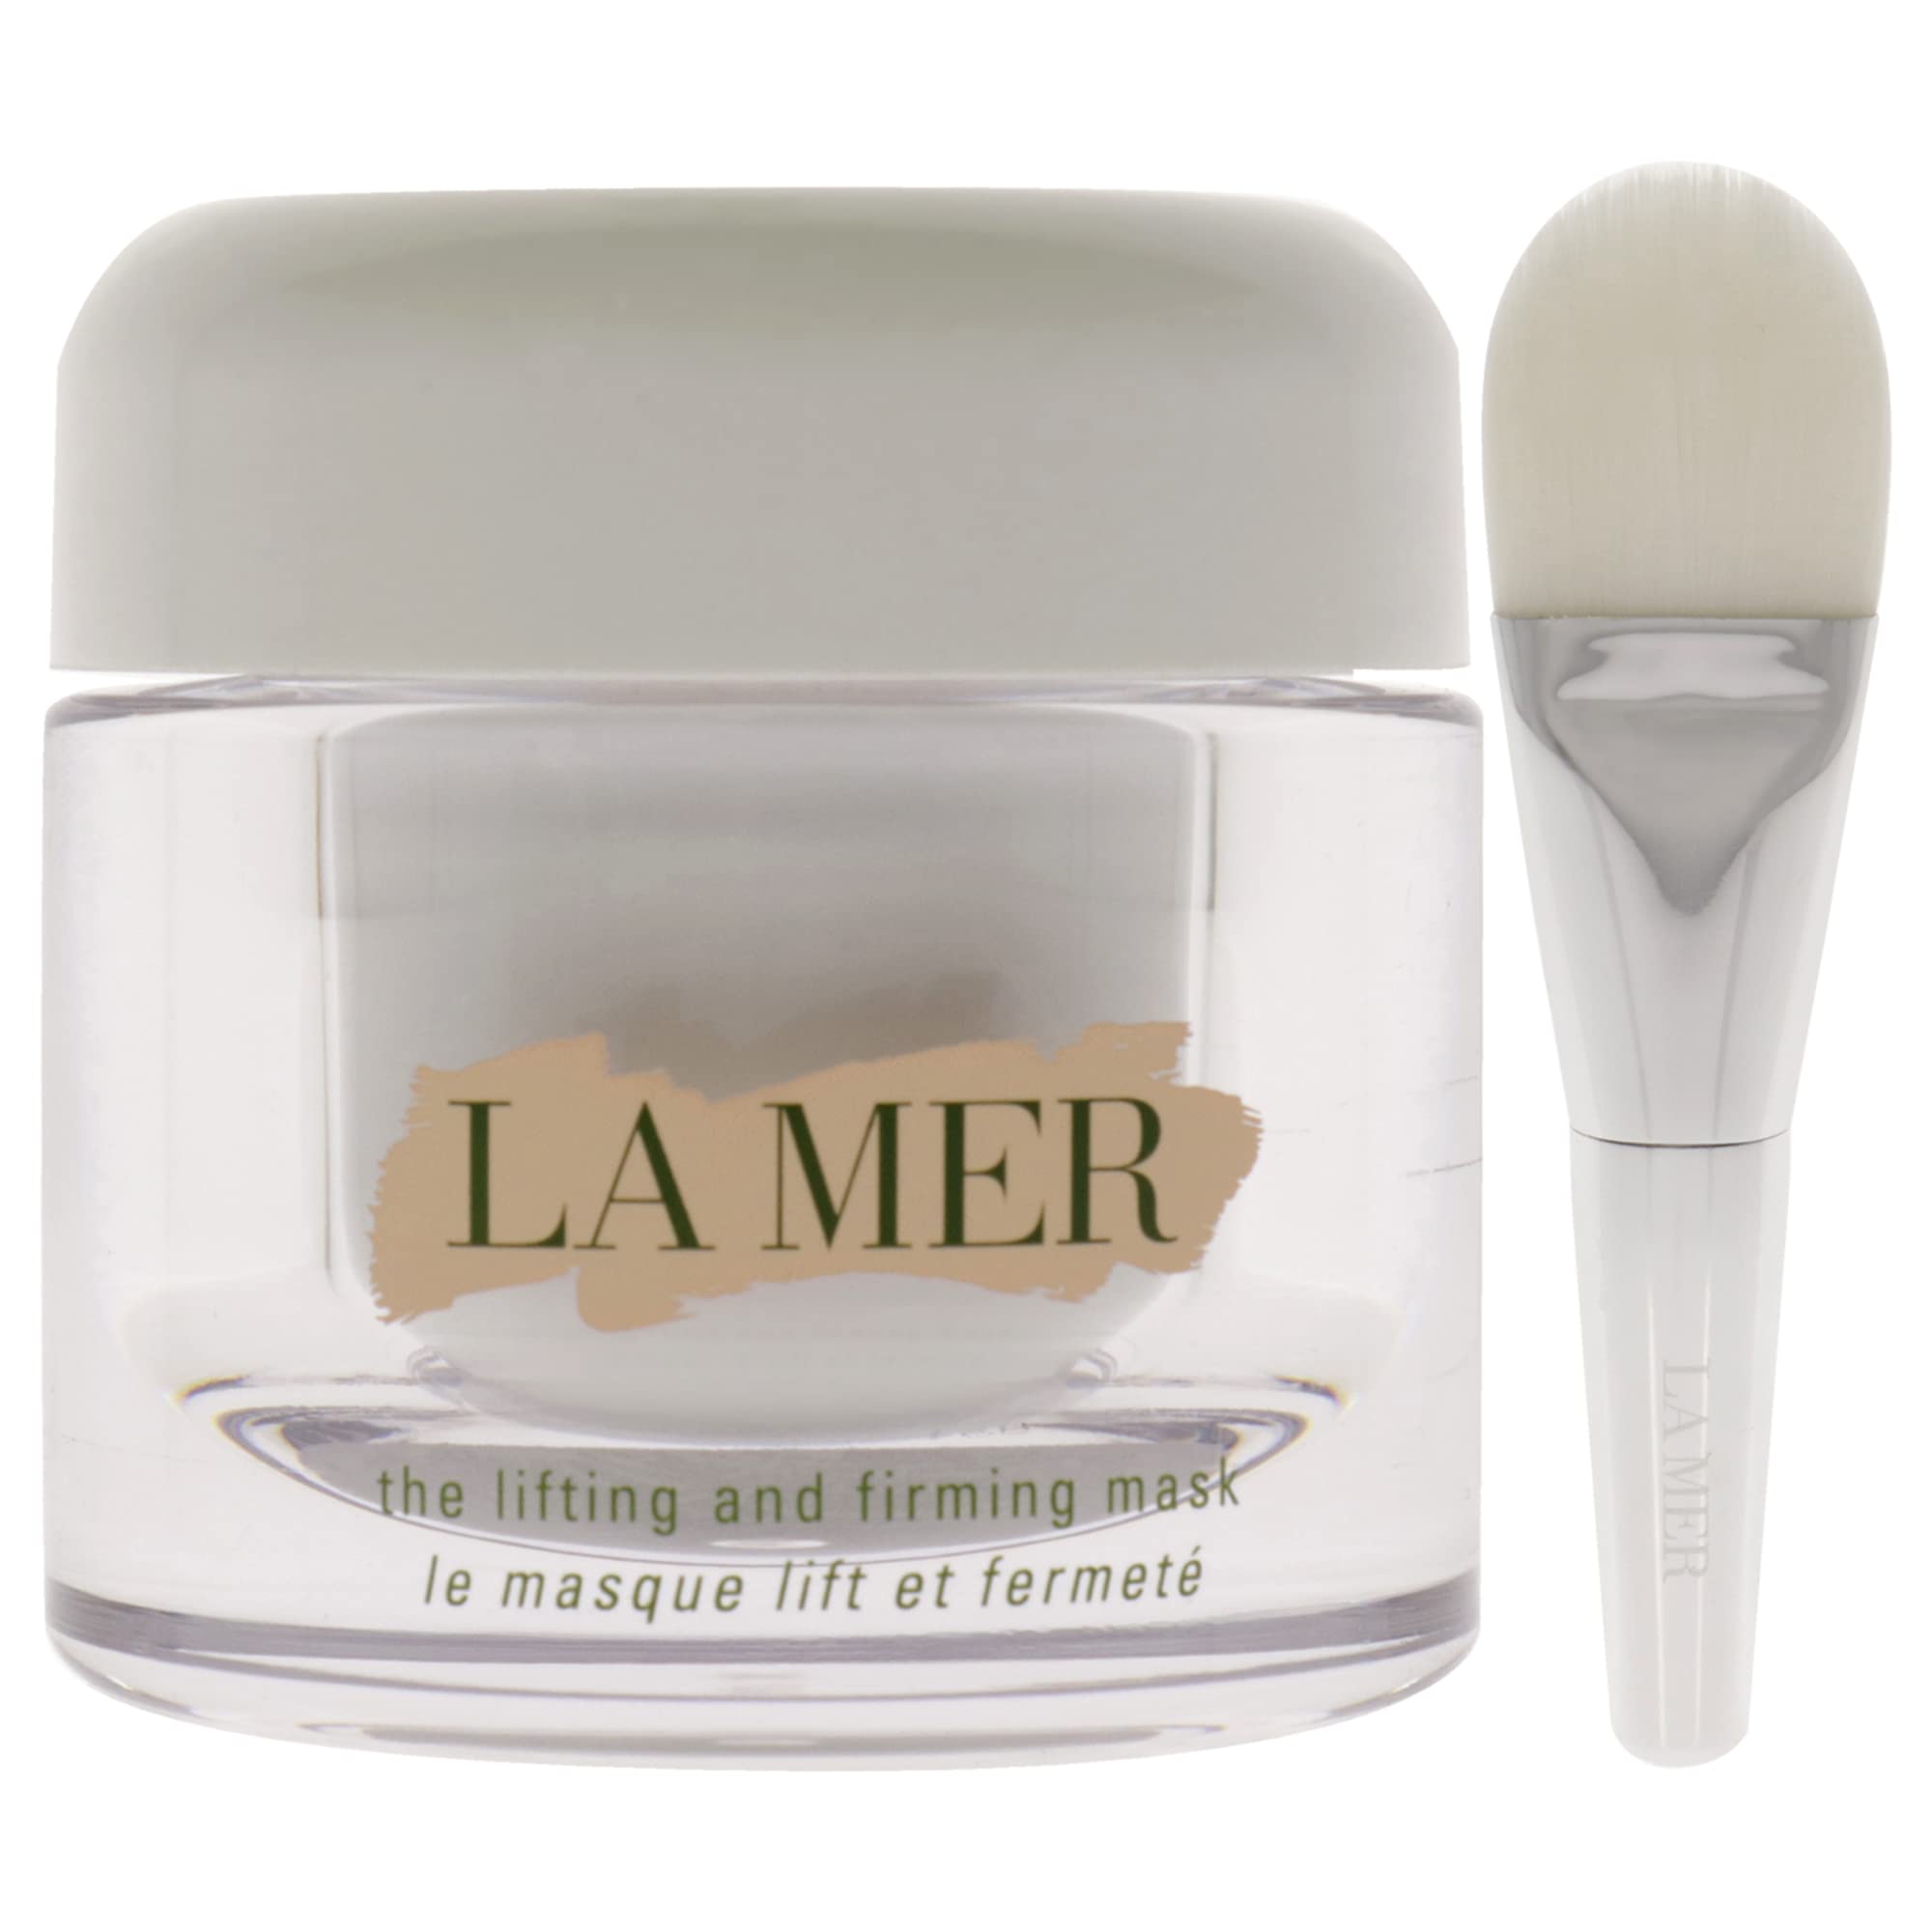 La Mer The Lifting and Firming Mask 50ml Almond